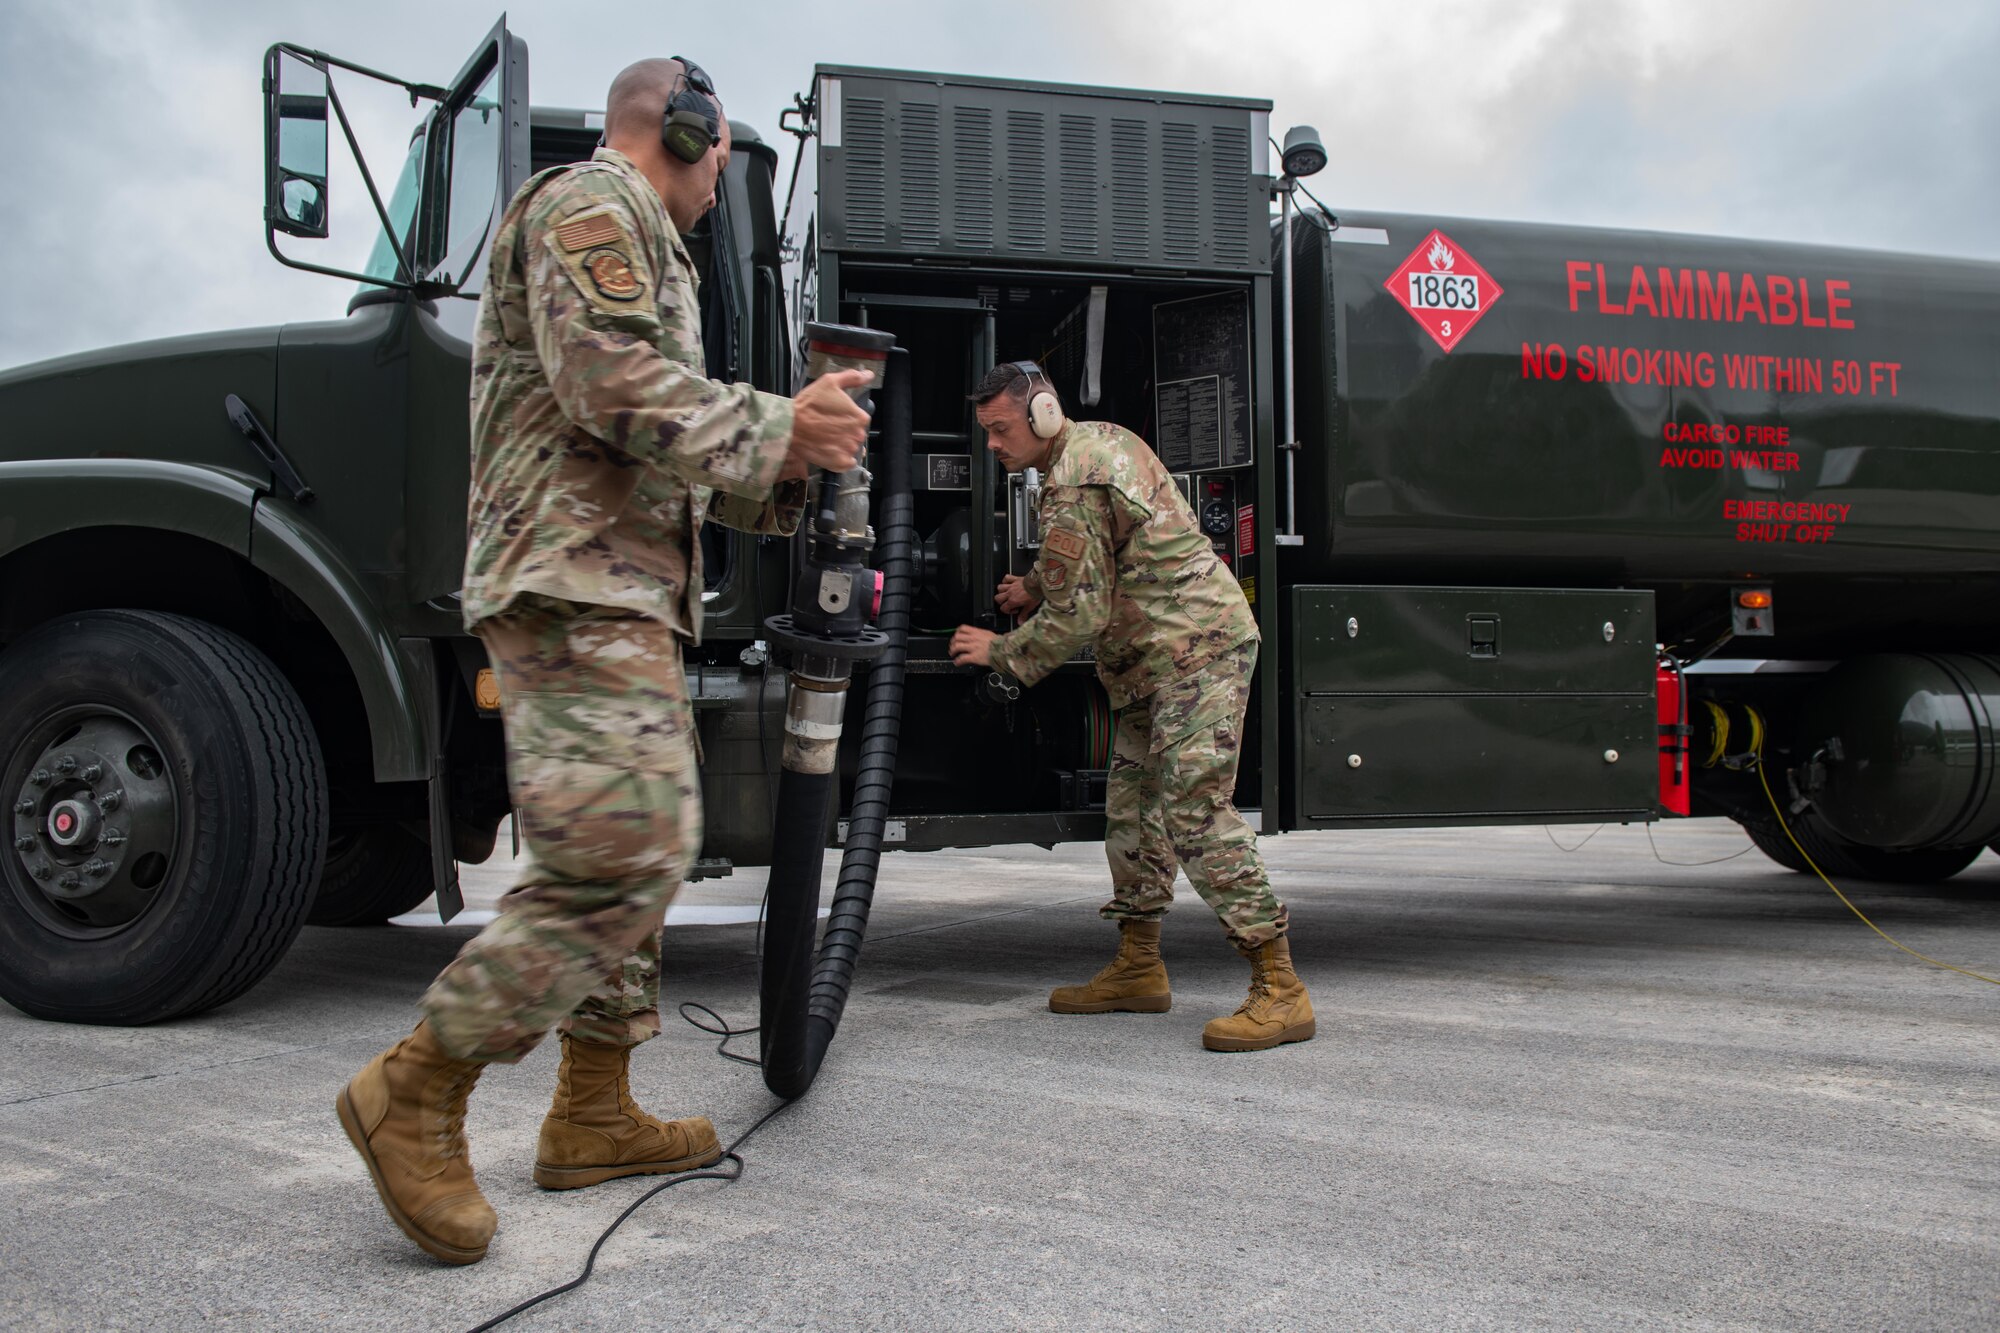 Two airmen roll up a fuel hose into a truck